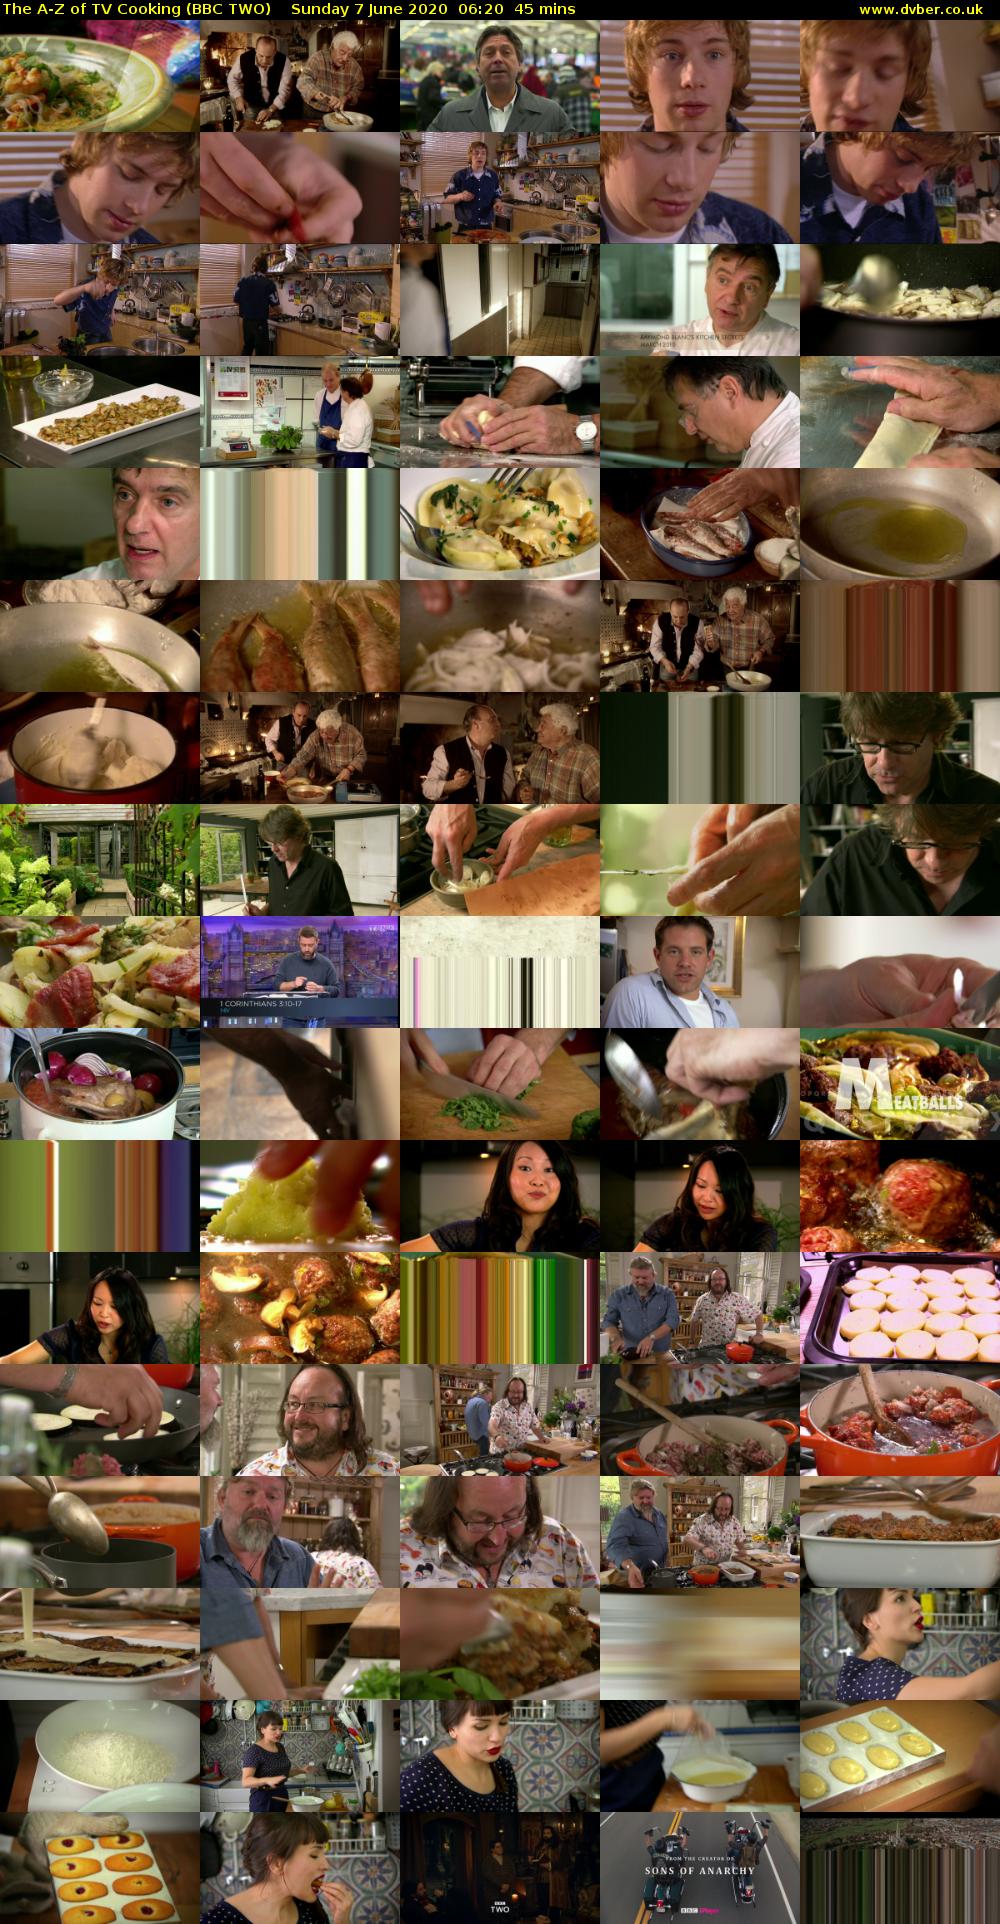 The A-Z of TV Cooking (BBC TWO) Sunday 7 June 2020 06:20 - 07:05